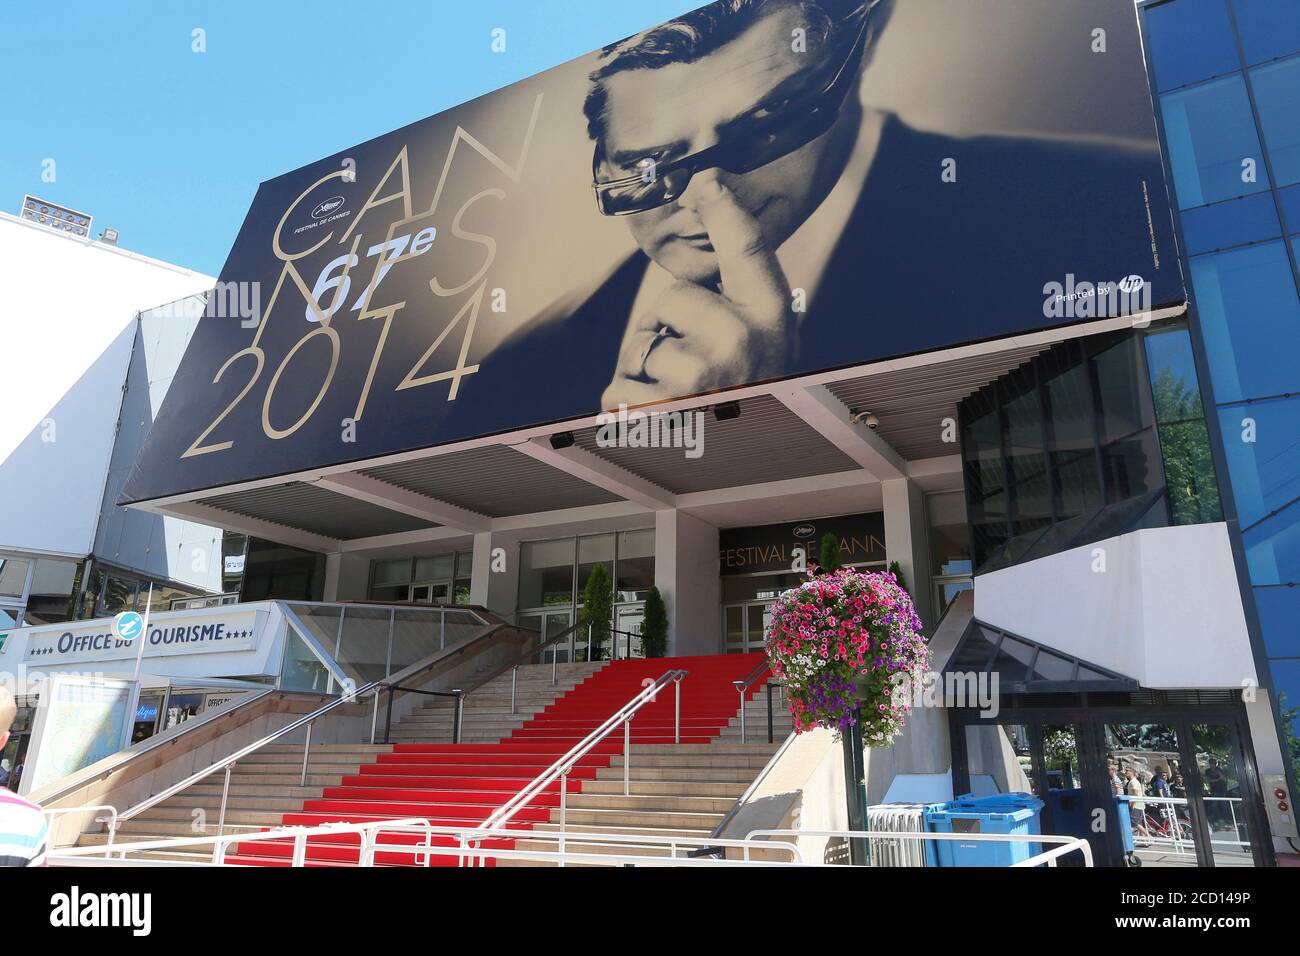 Cannes, France - May 23, 2014 - The original Palais des Festivals was built in 1947 to host the Cannes Film Festival 2014. Poster with marcello mastro Stock Photo